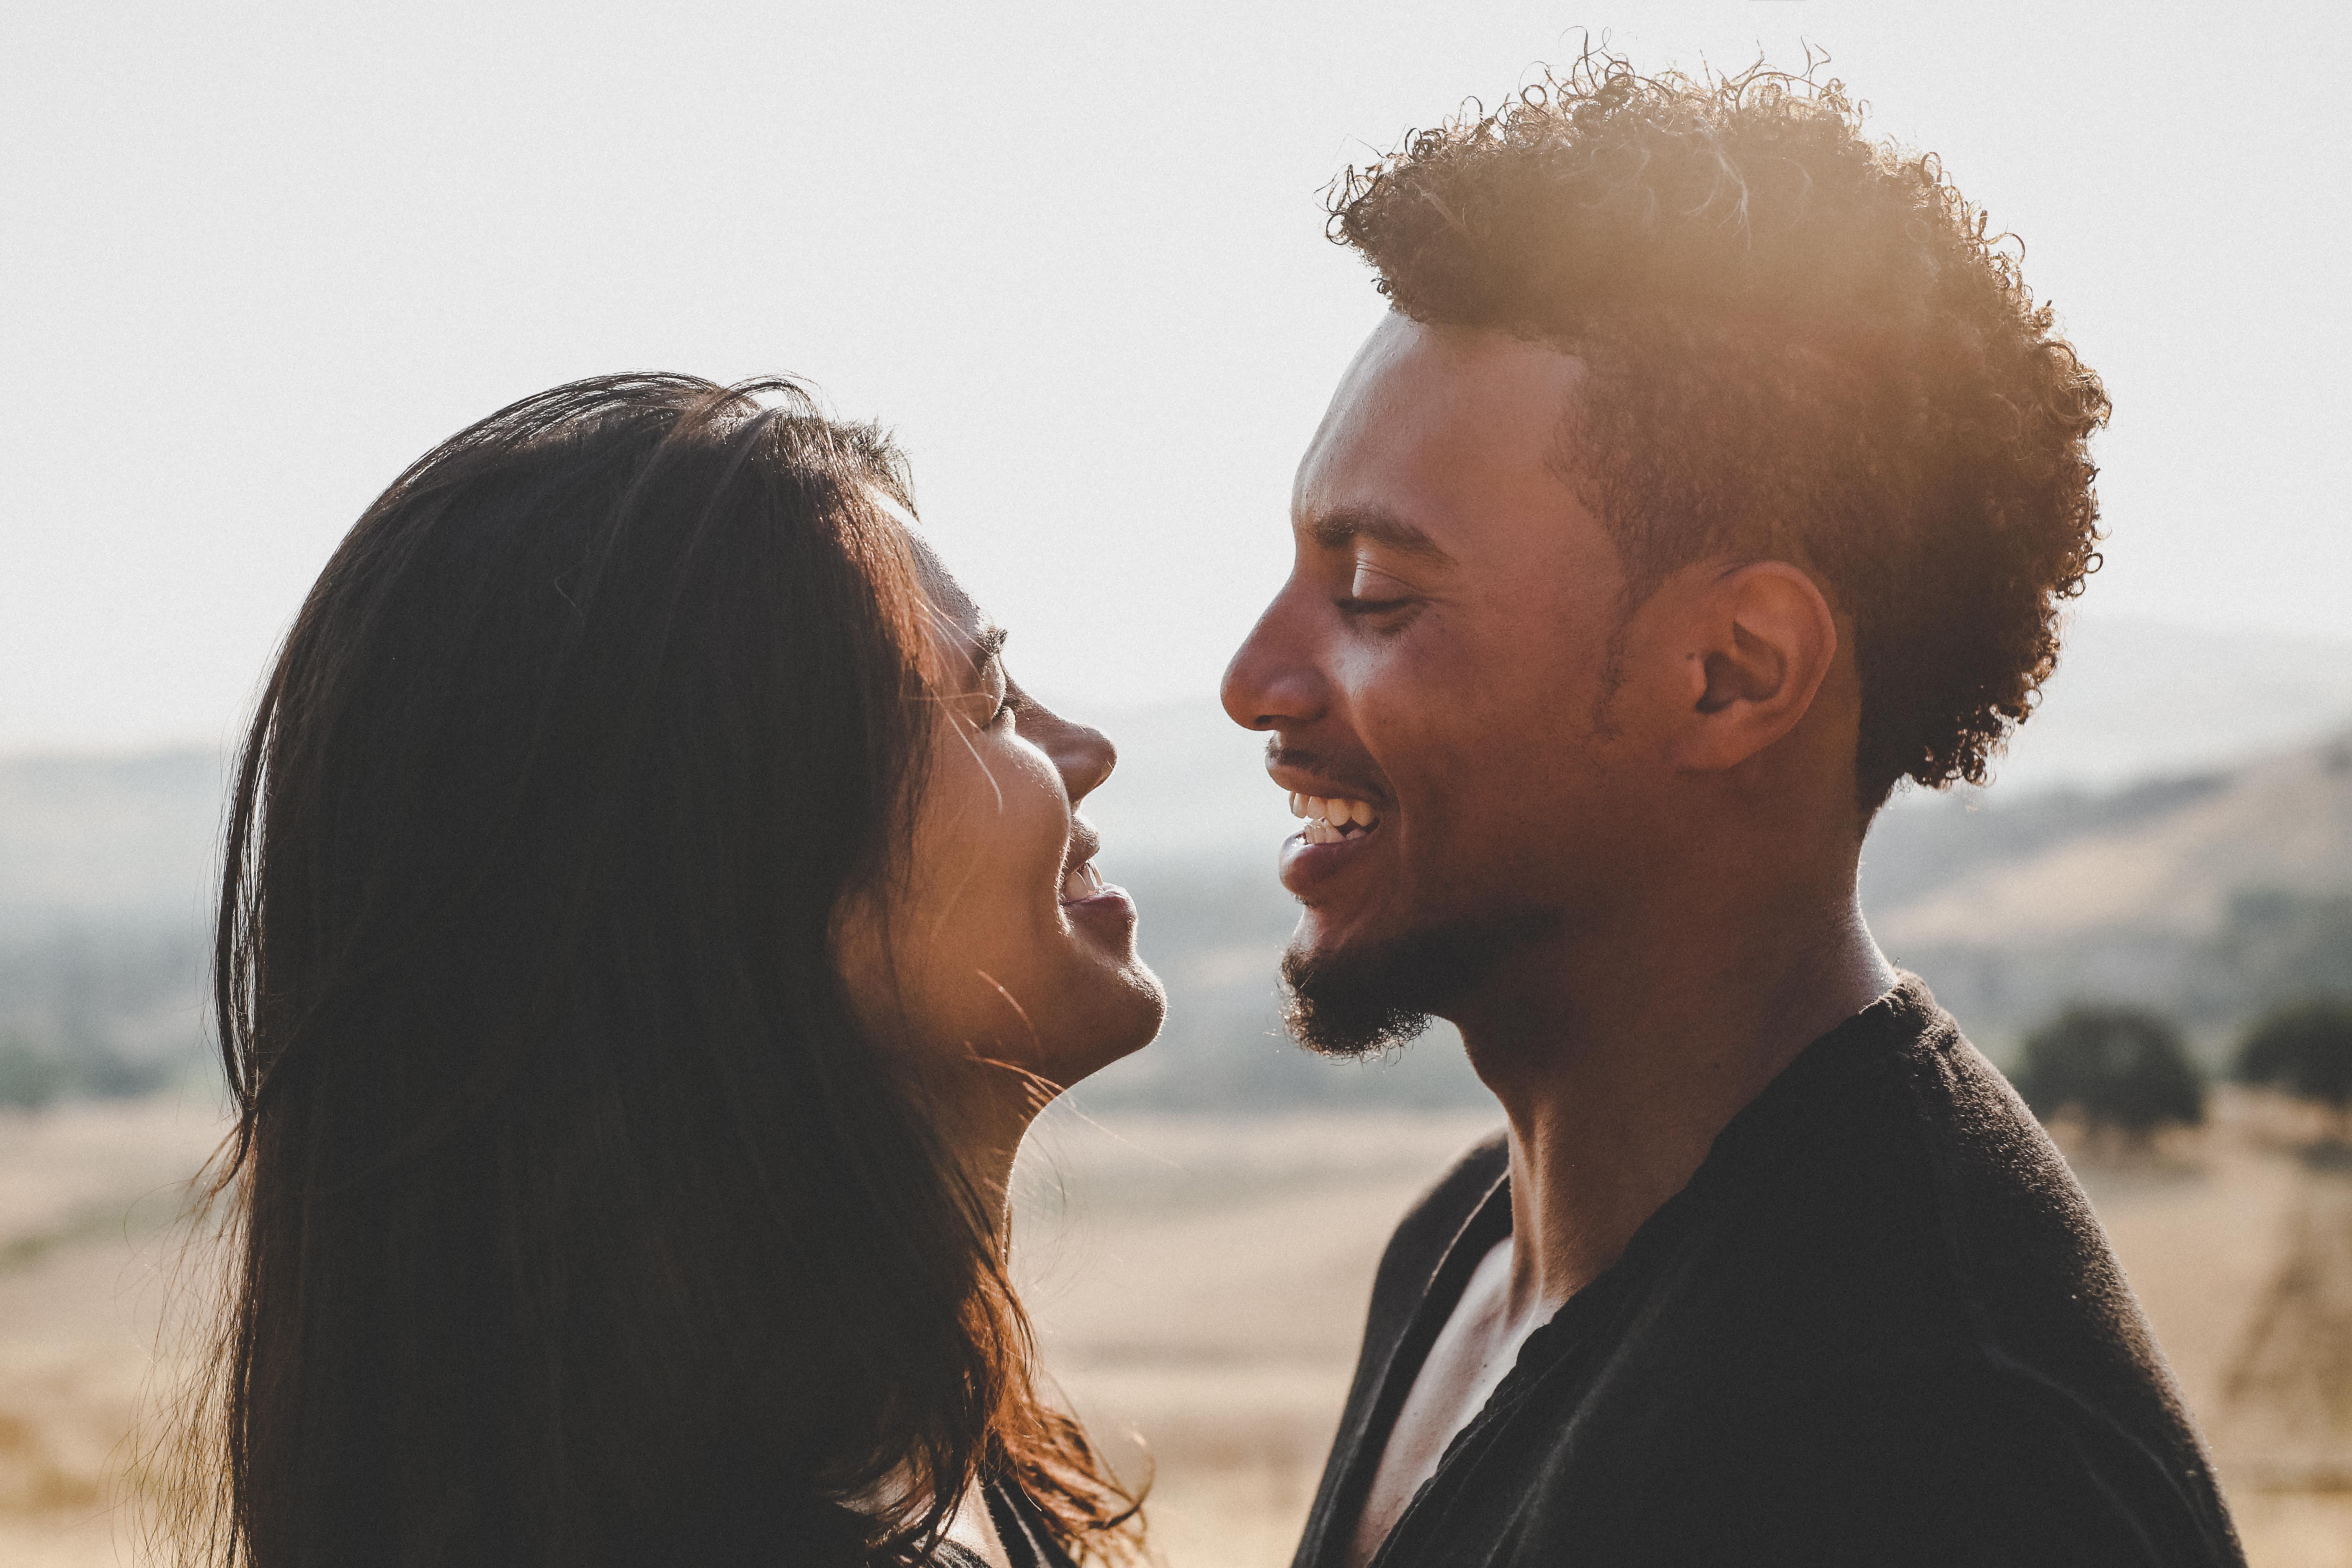 woman looks at man as they both smile